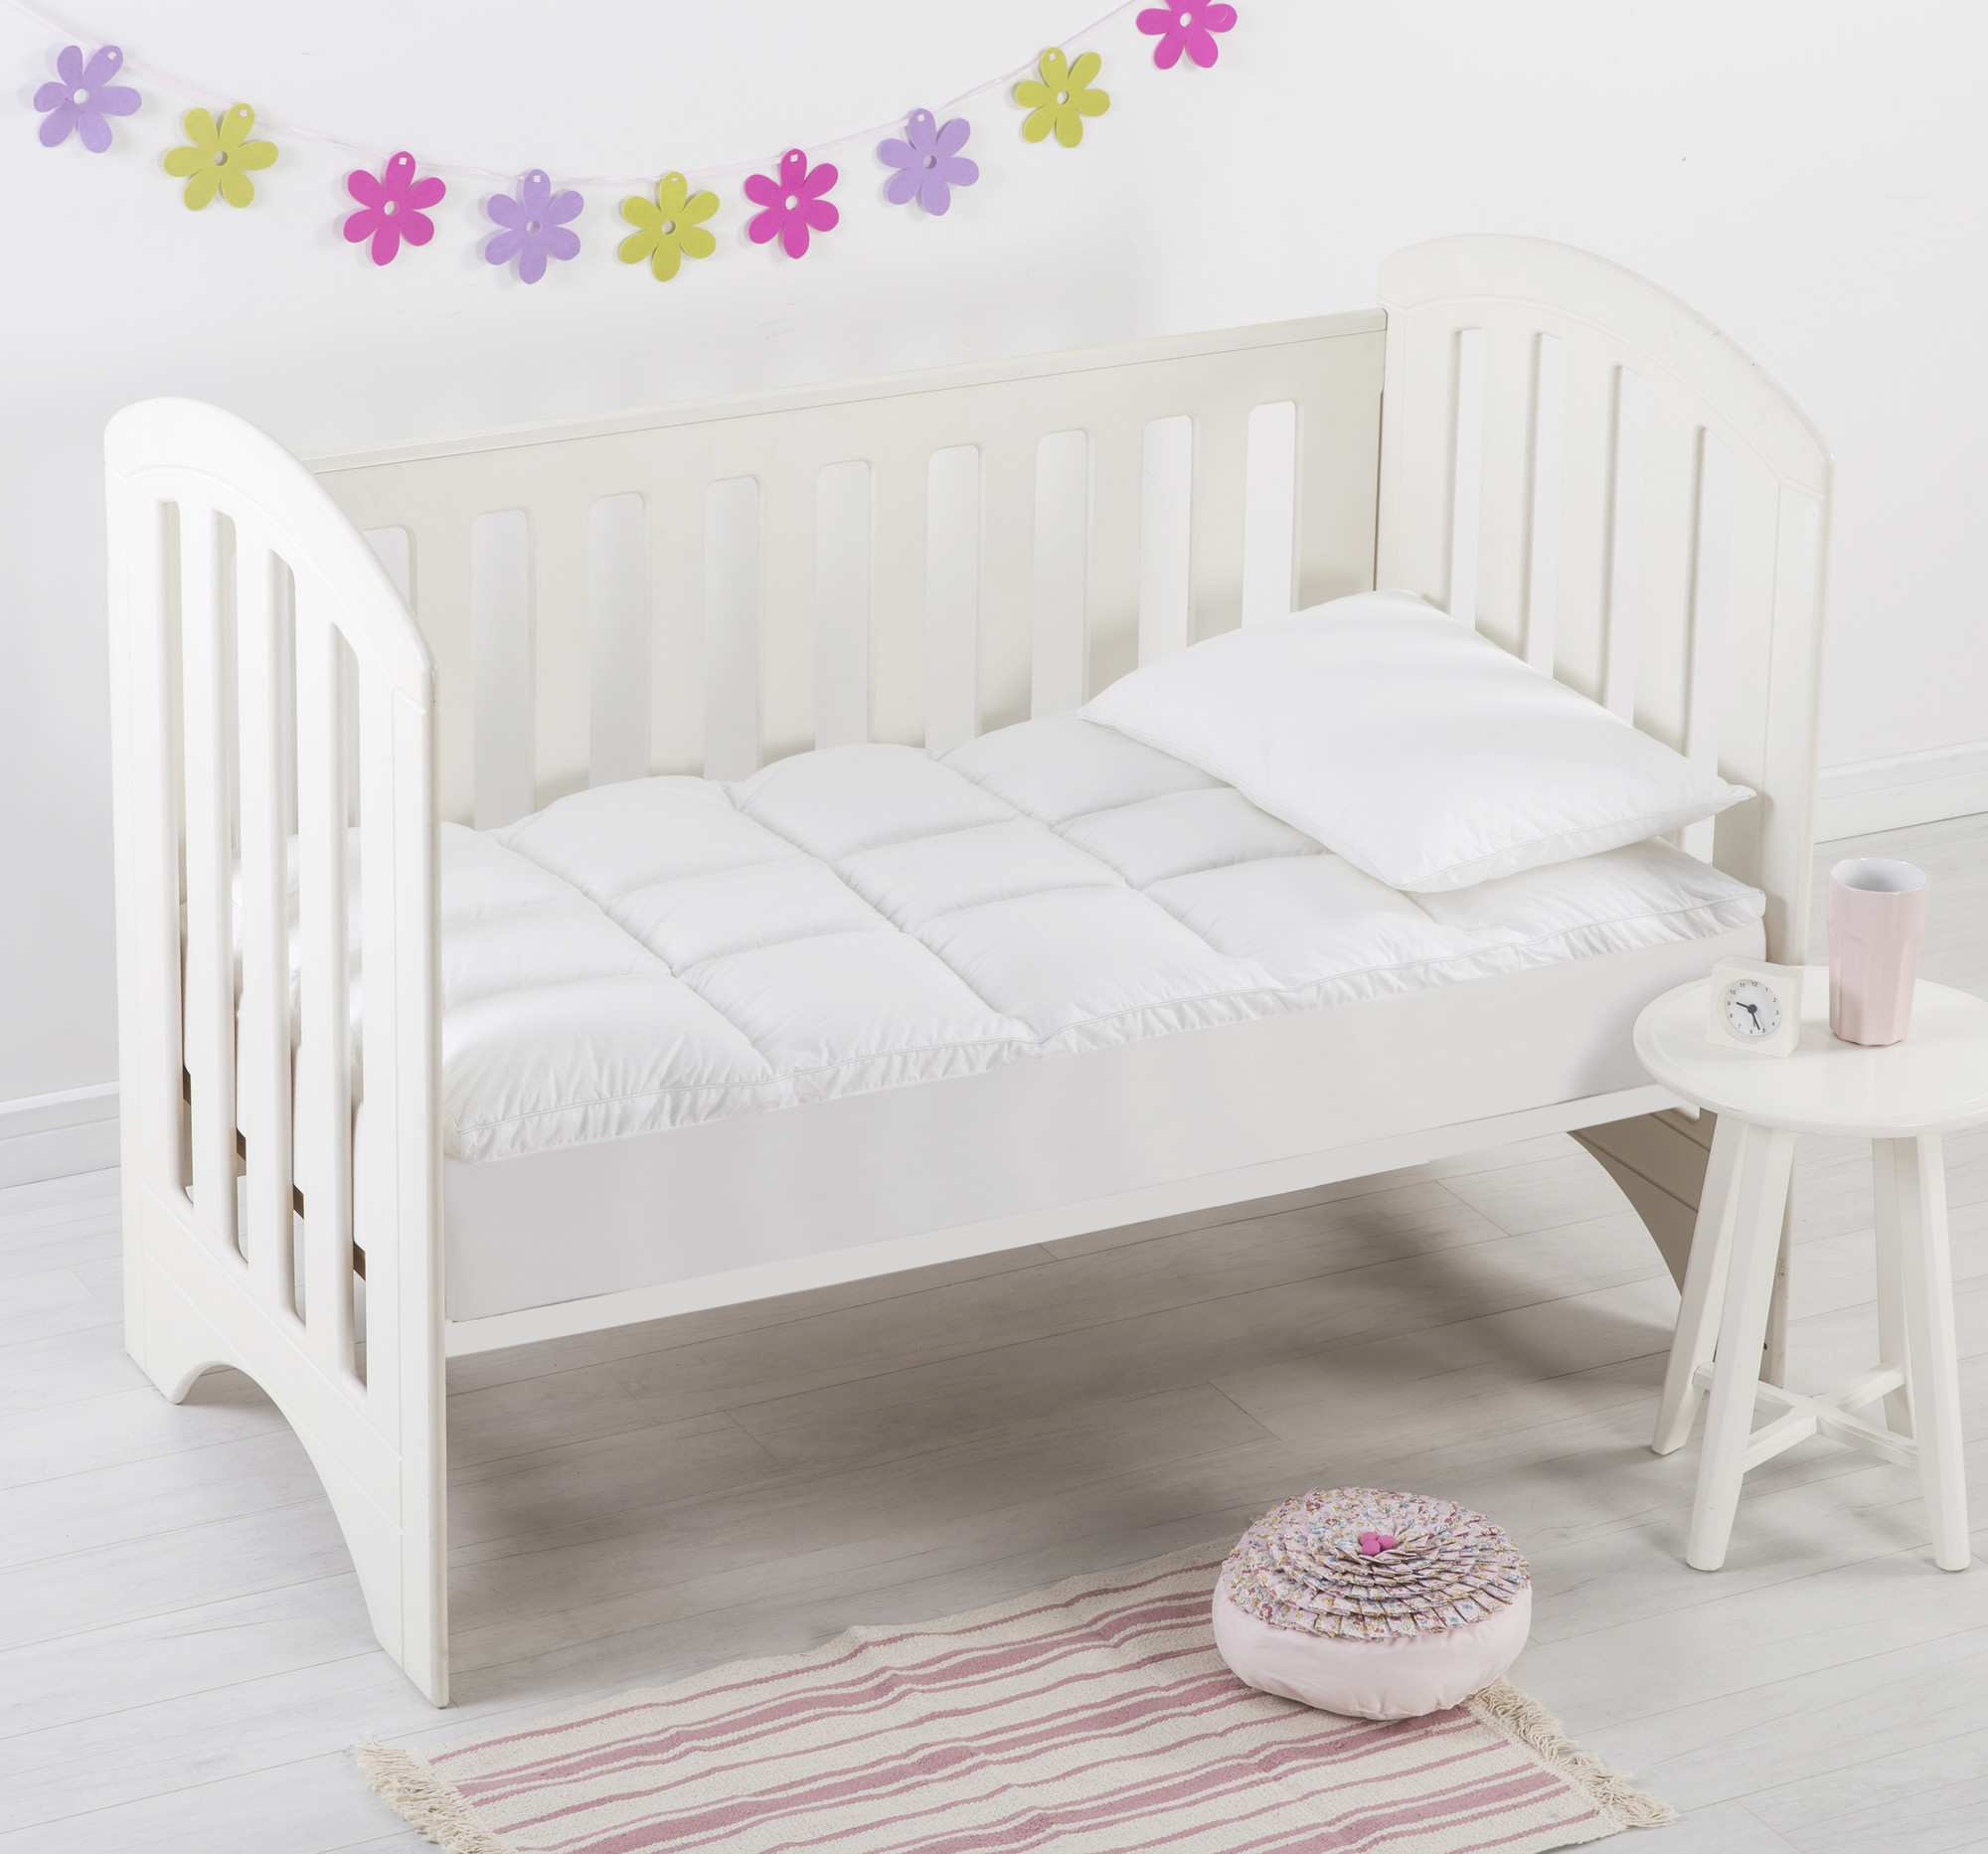 size of baby cot